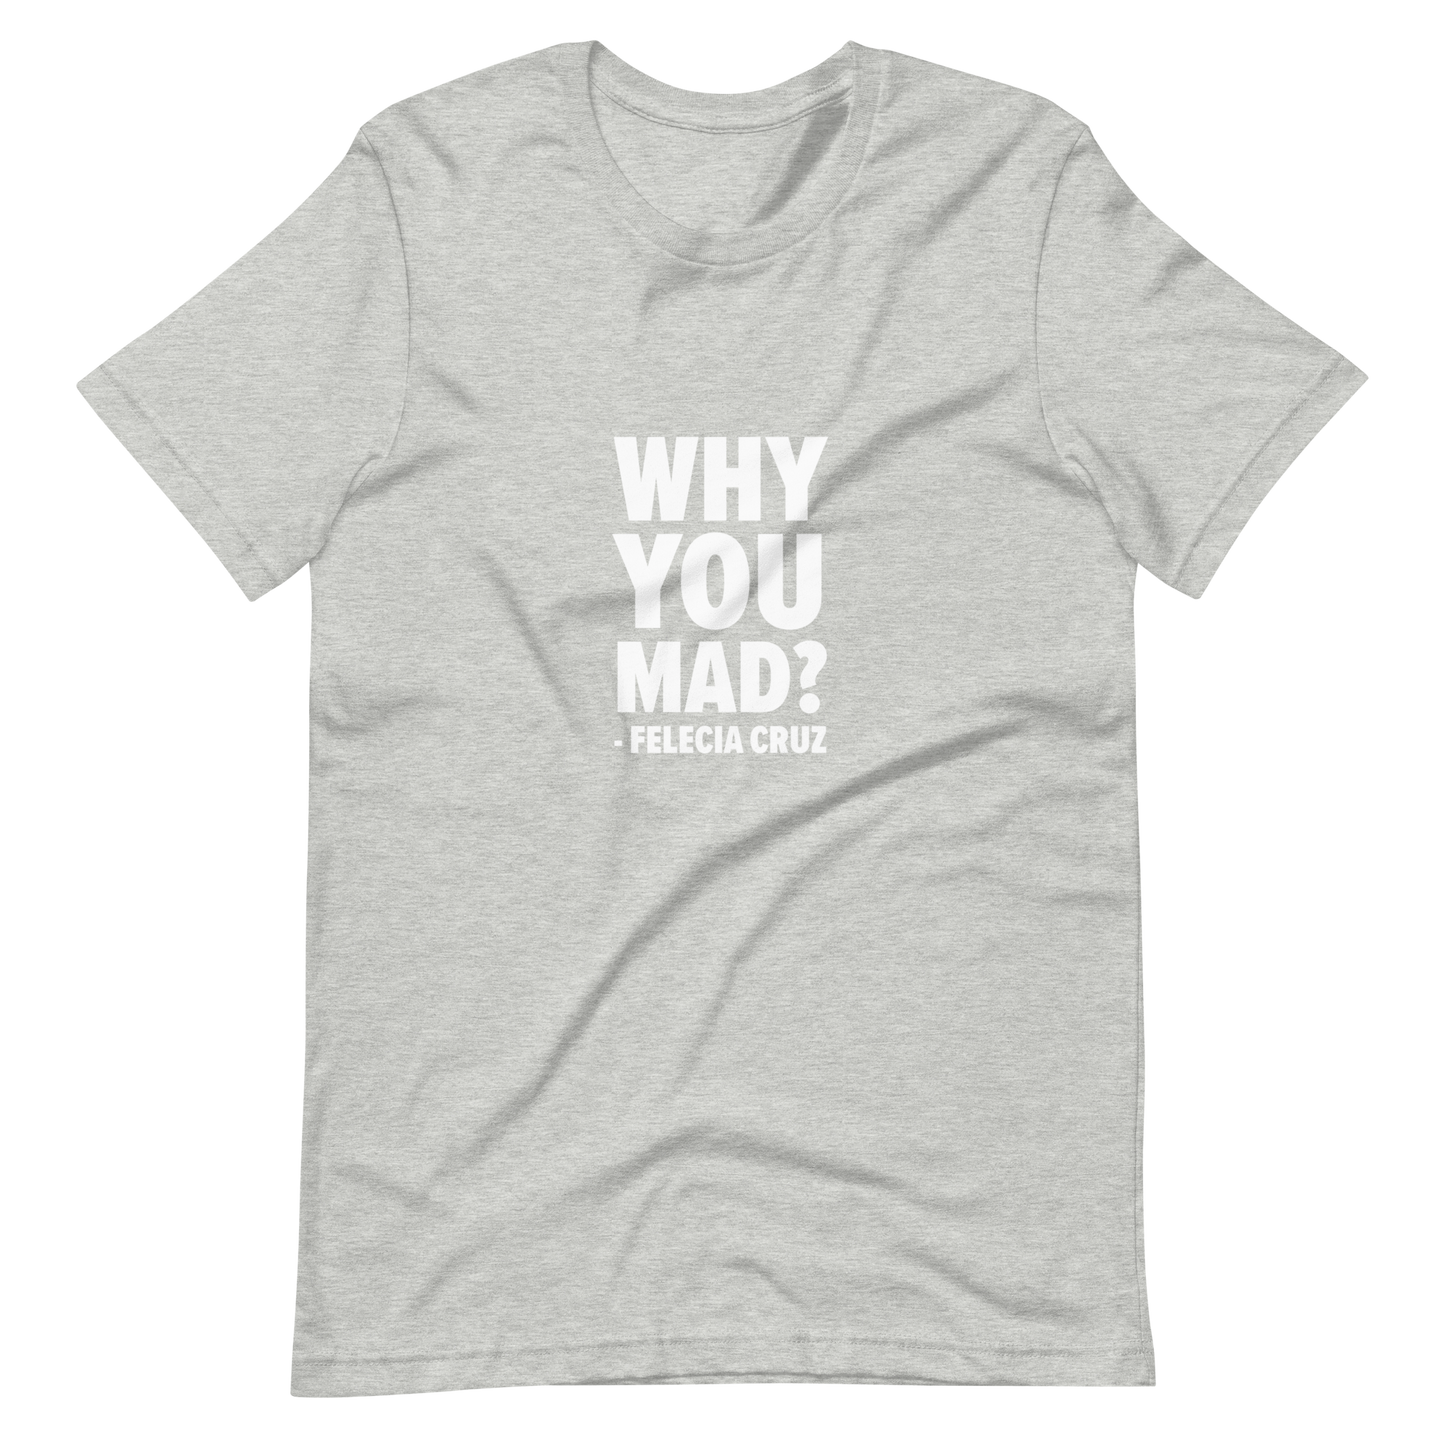 Why You Mad? Unisex T-Shirt